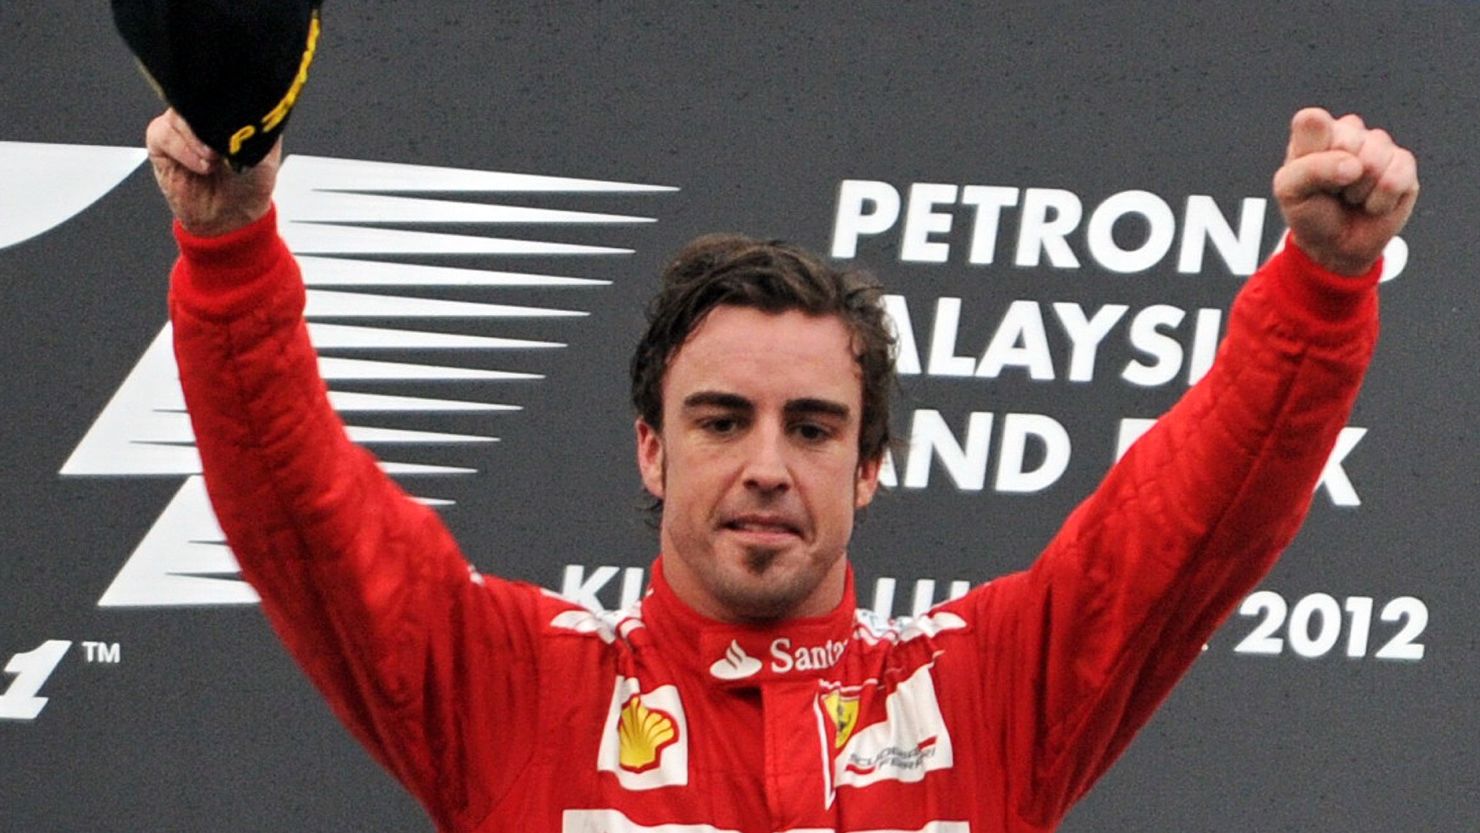 Spain's Fernando Alonso celebrates his victory in the Malaysian Grand Prix at Sepang.